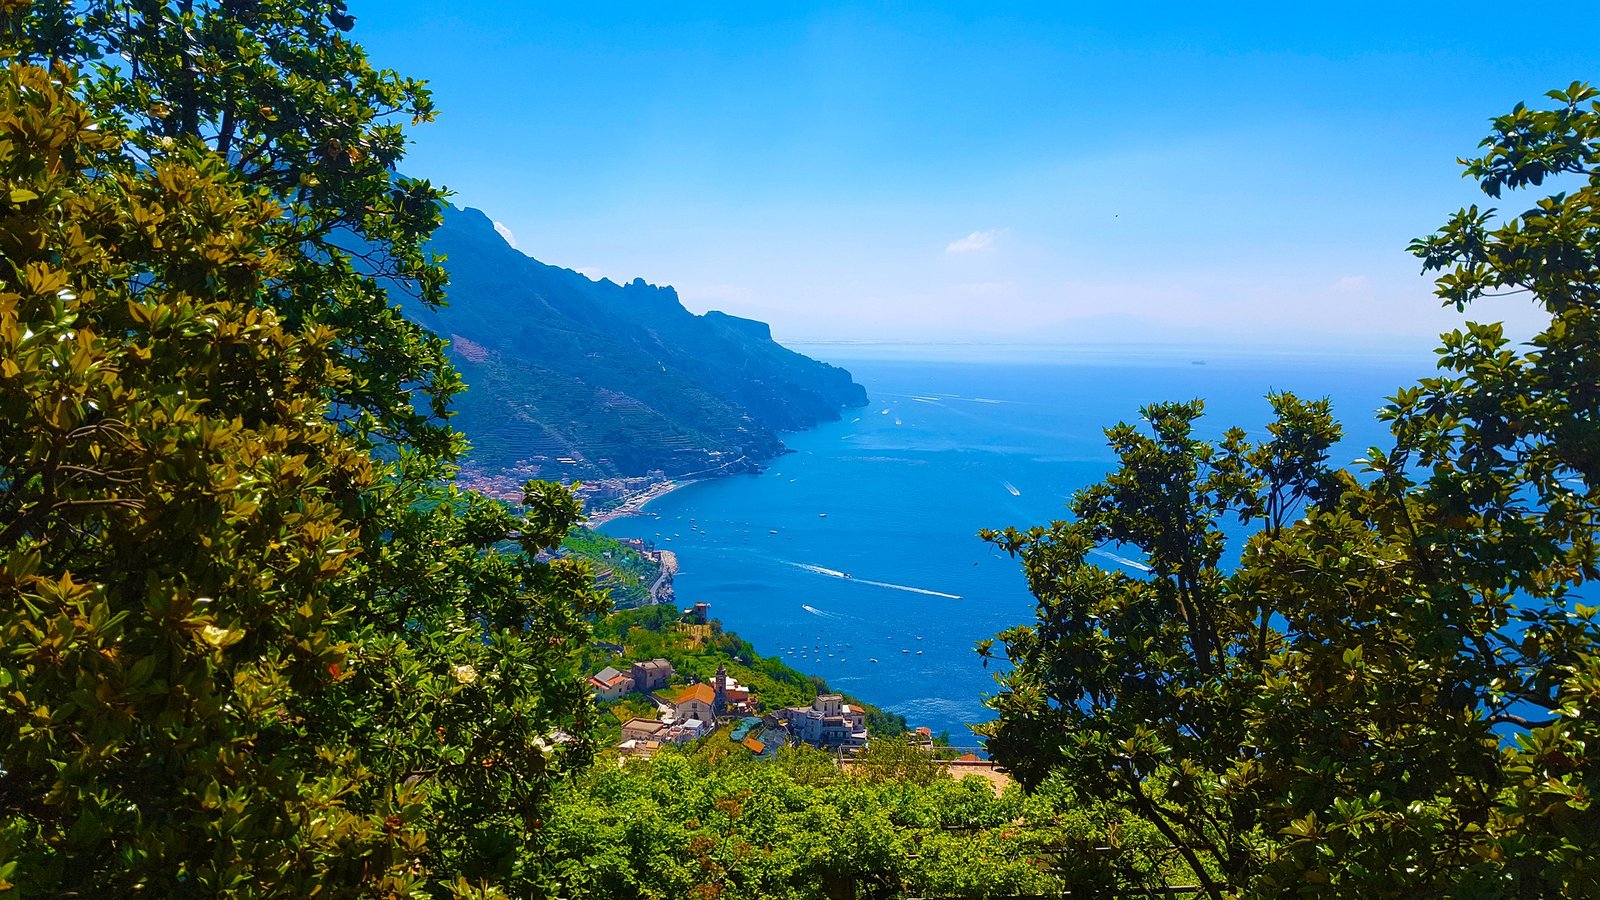 How to Ensure a Hassle-Free Private Transfer from Naples to Positano